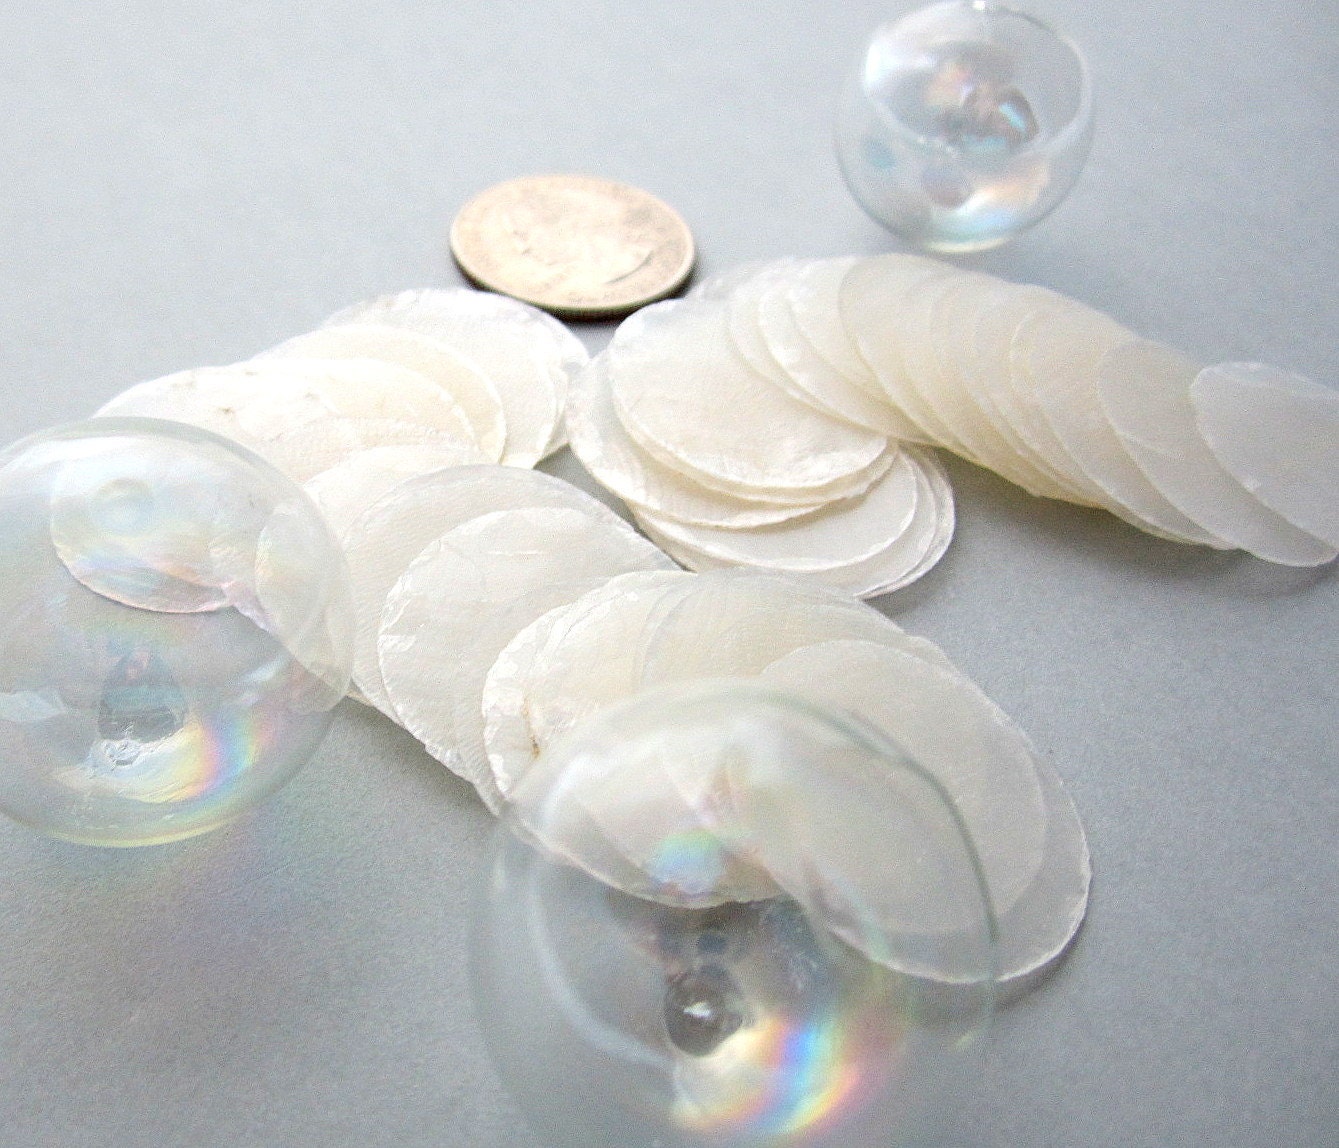 Vintage Round Capiz Shells, Total of 12, No HOLE Capiz Shells, Indonesian  Sea Shells Shells for Craft My40yearcollection 